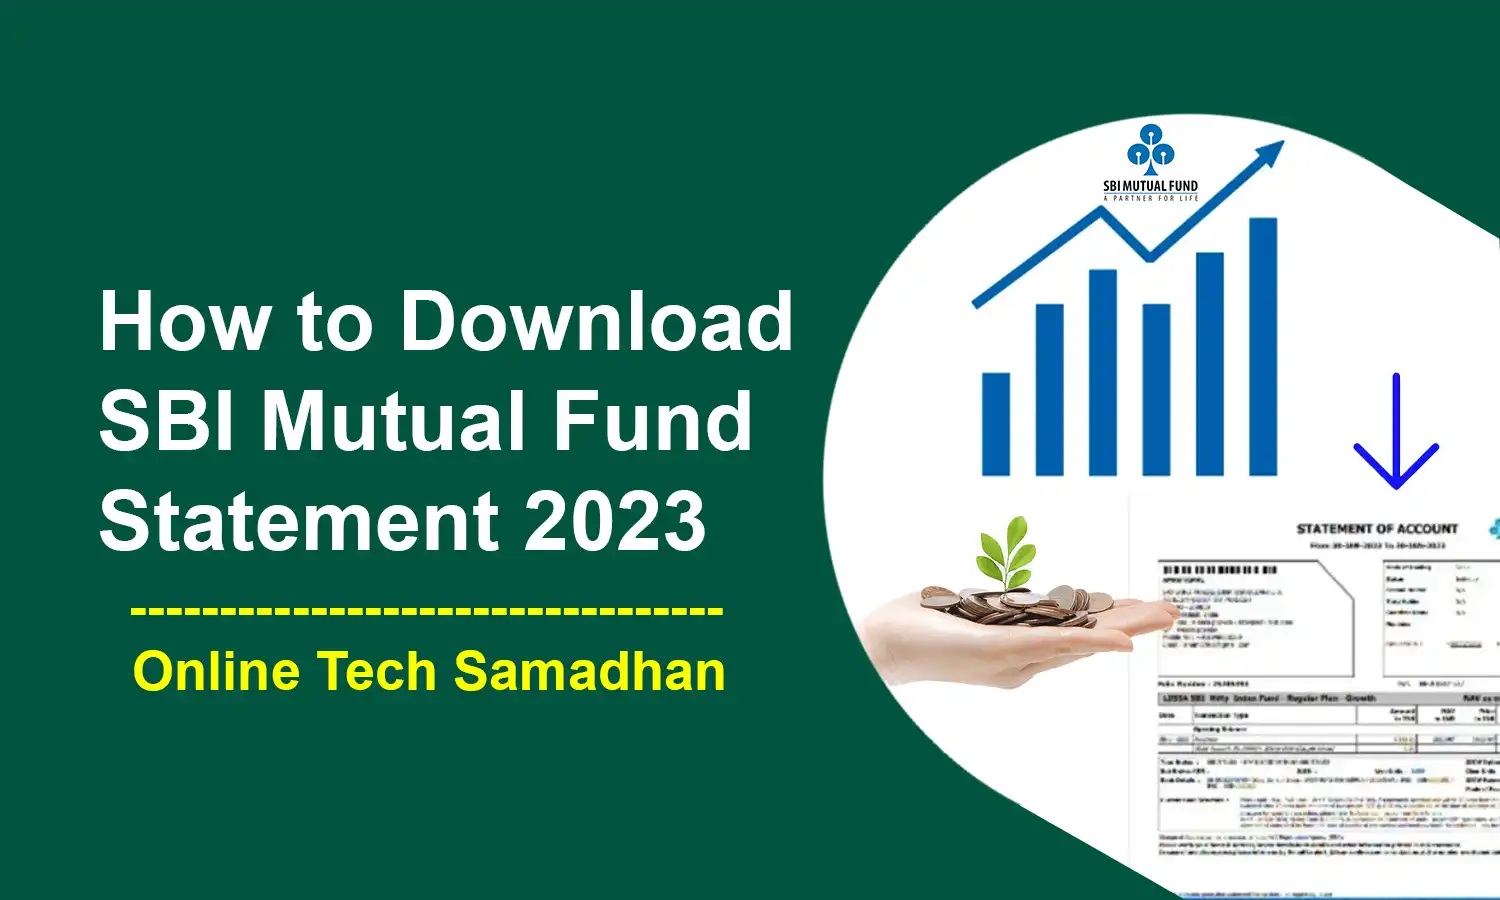 How to Download SBI Mutual Fund Statement